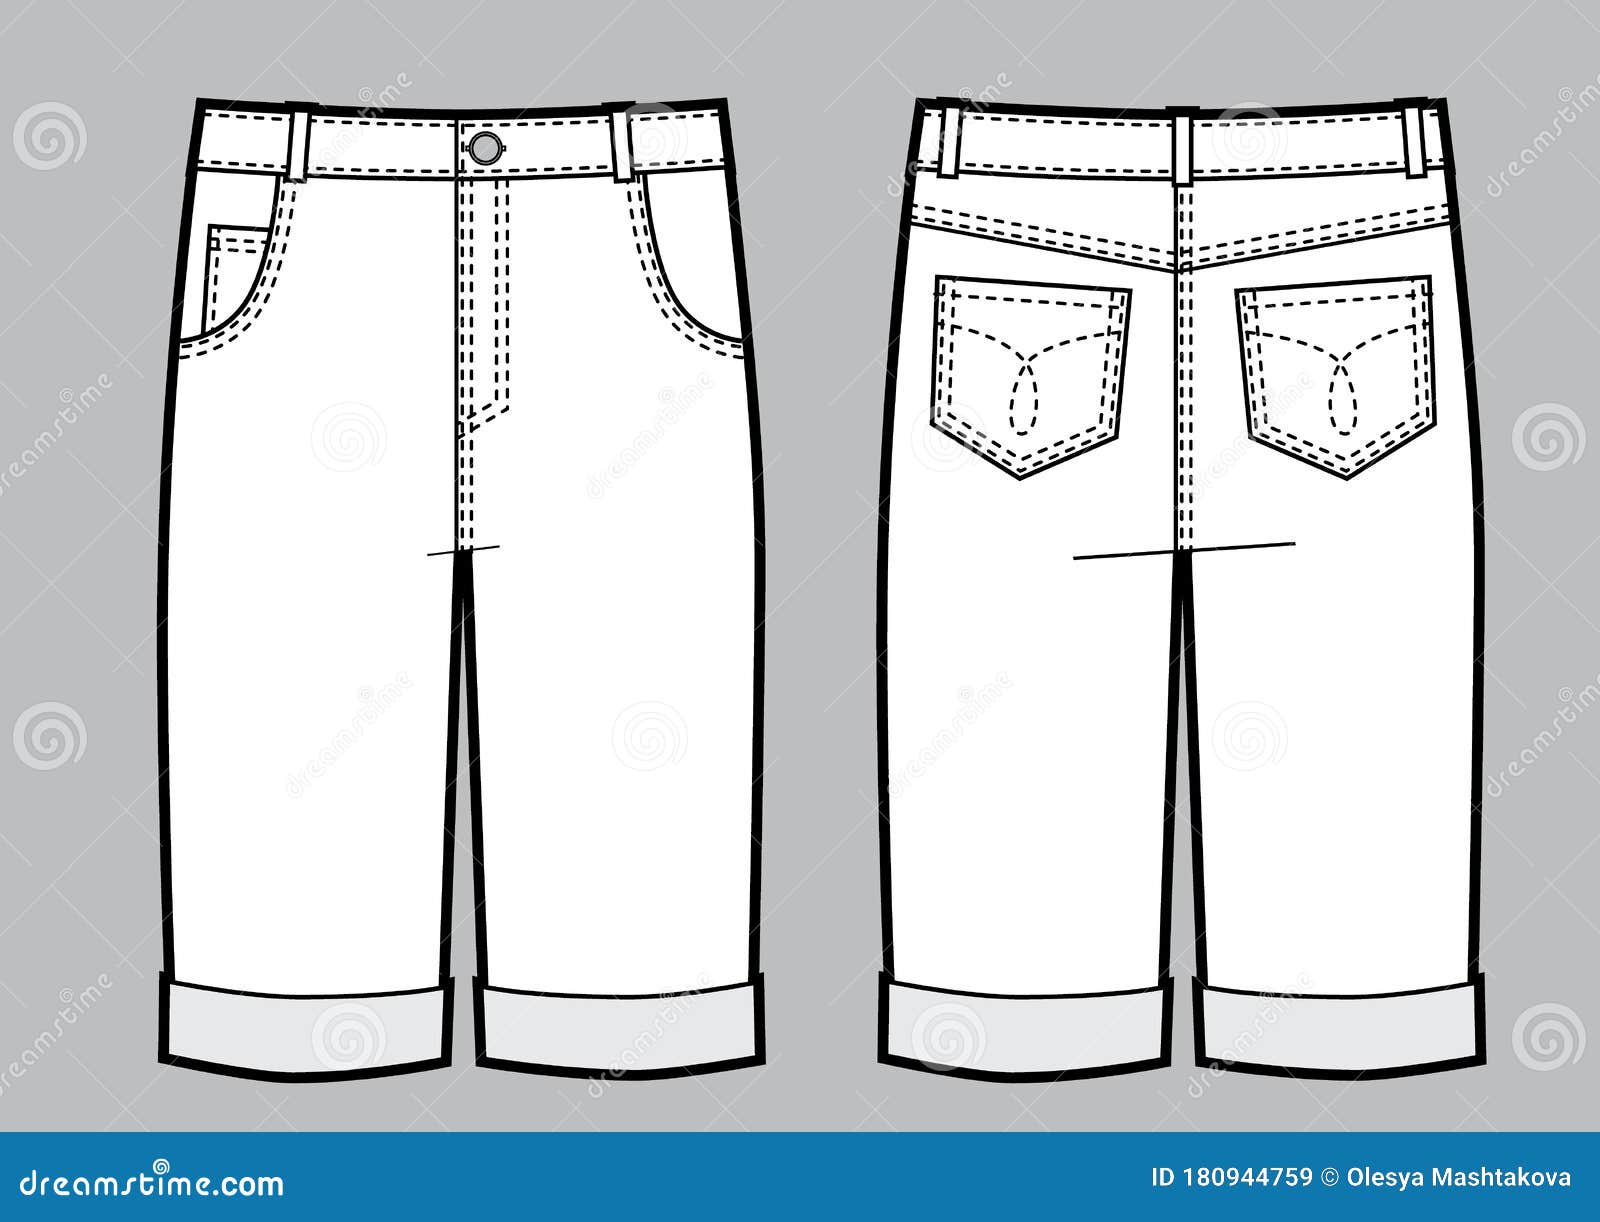 Vector Illustration of Man Jeans Shorts. Front and Back Views Stock ...